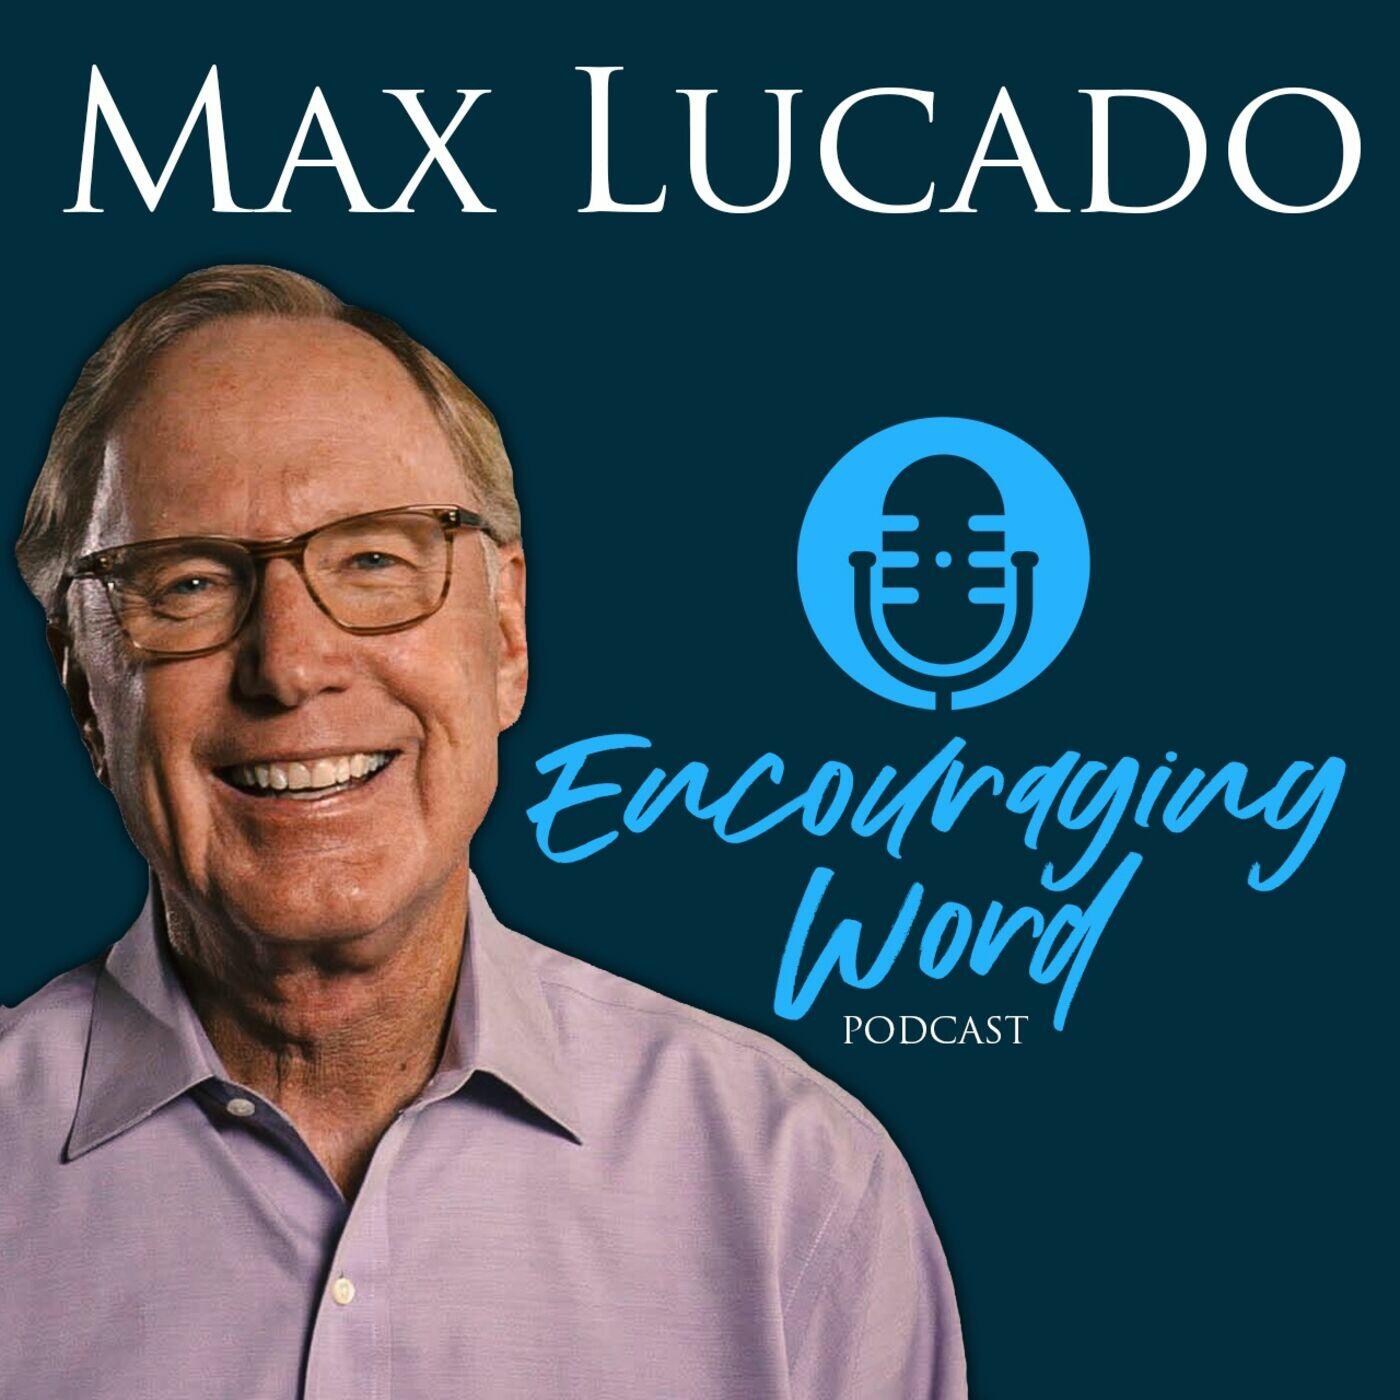 The Max Lucado Encouraging Word Podcast iHeart